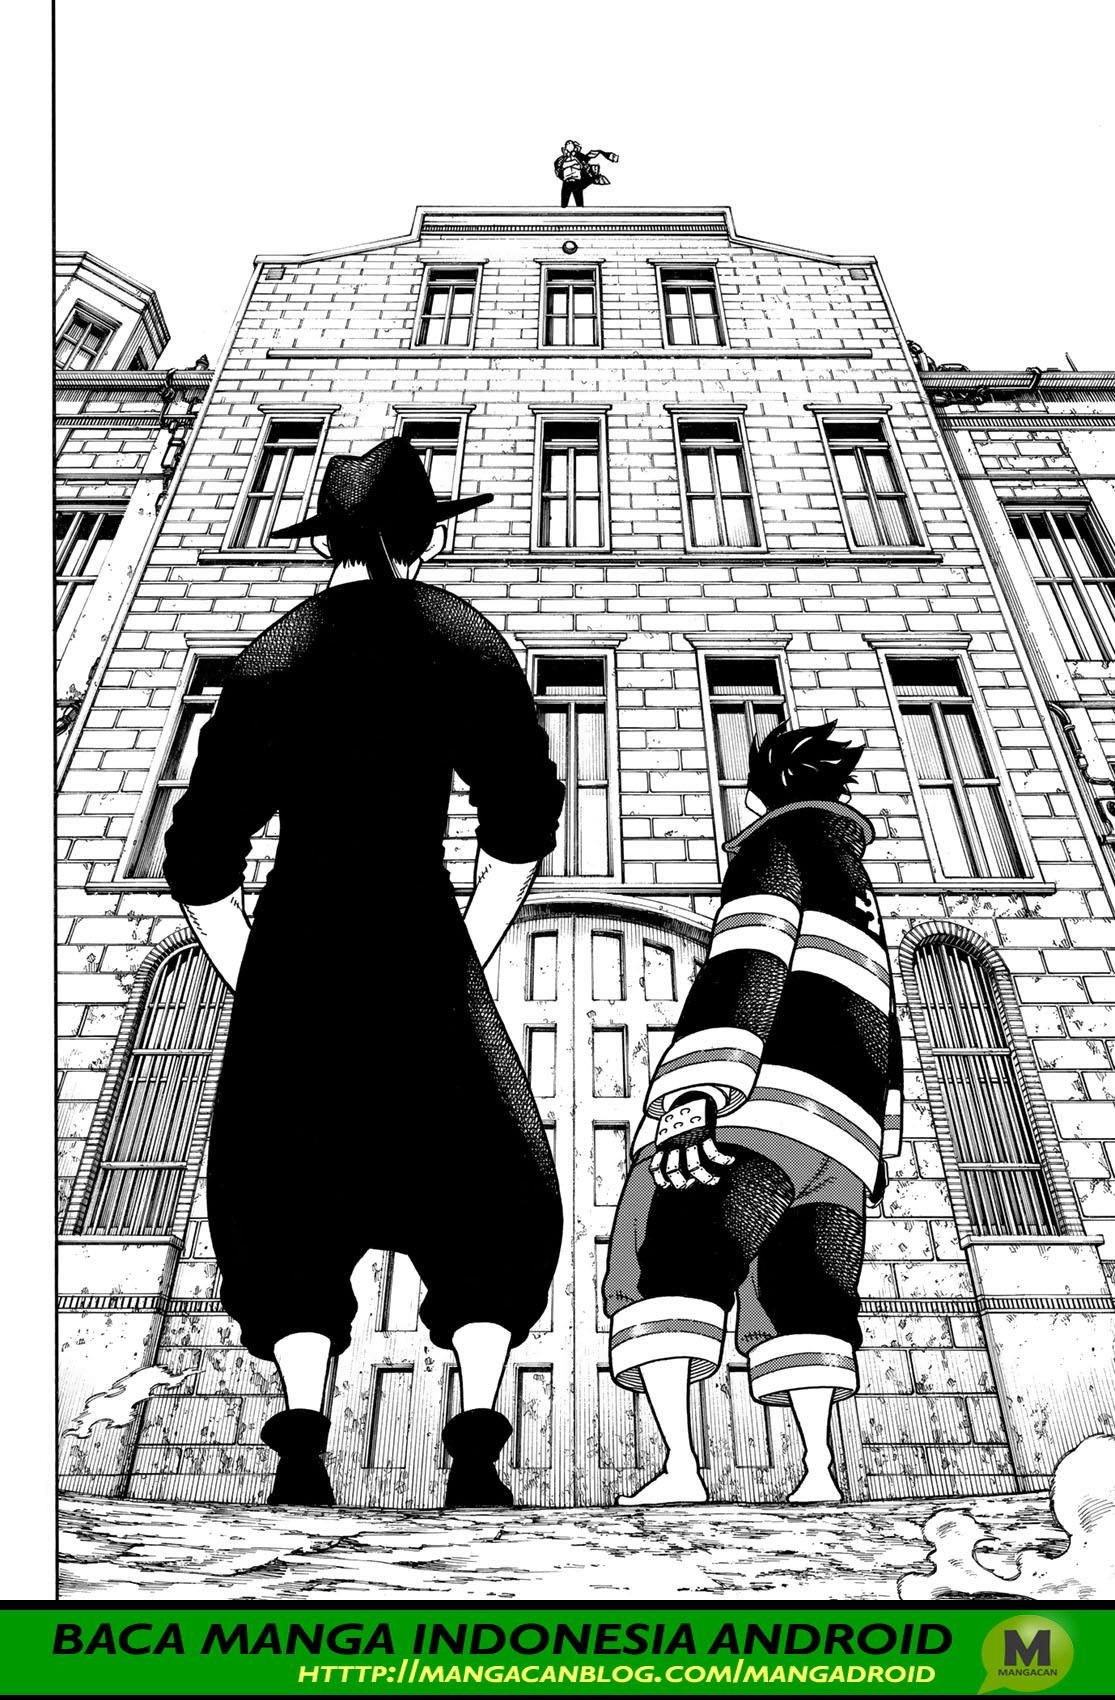 Fire Brigade of Flames Chapter 181